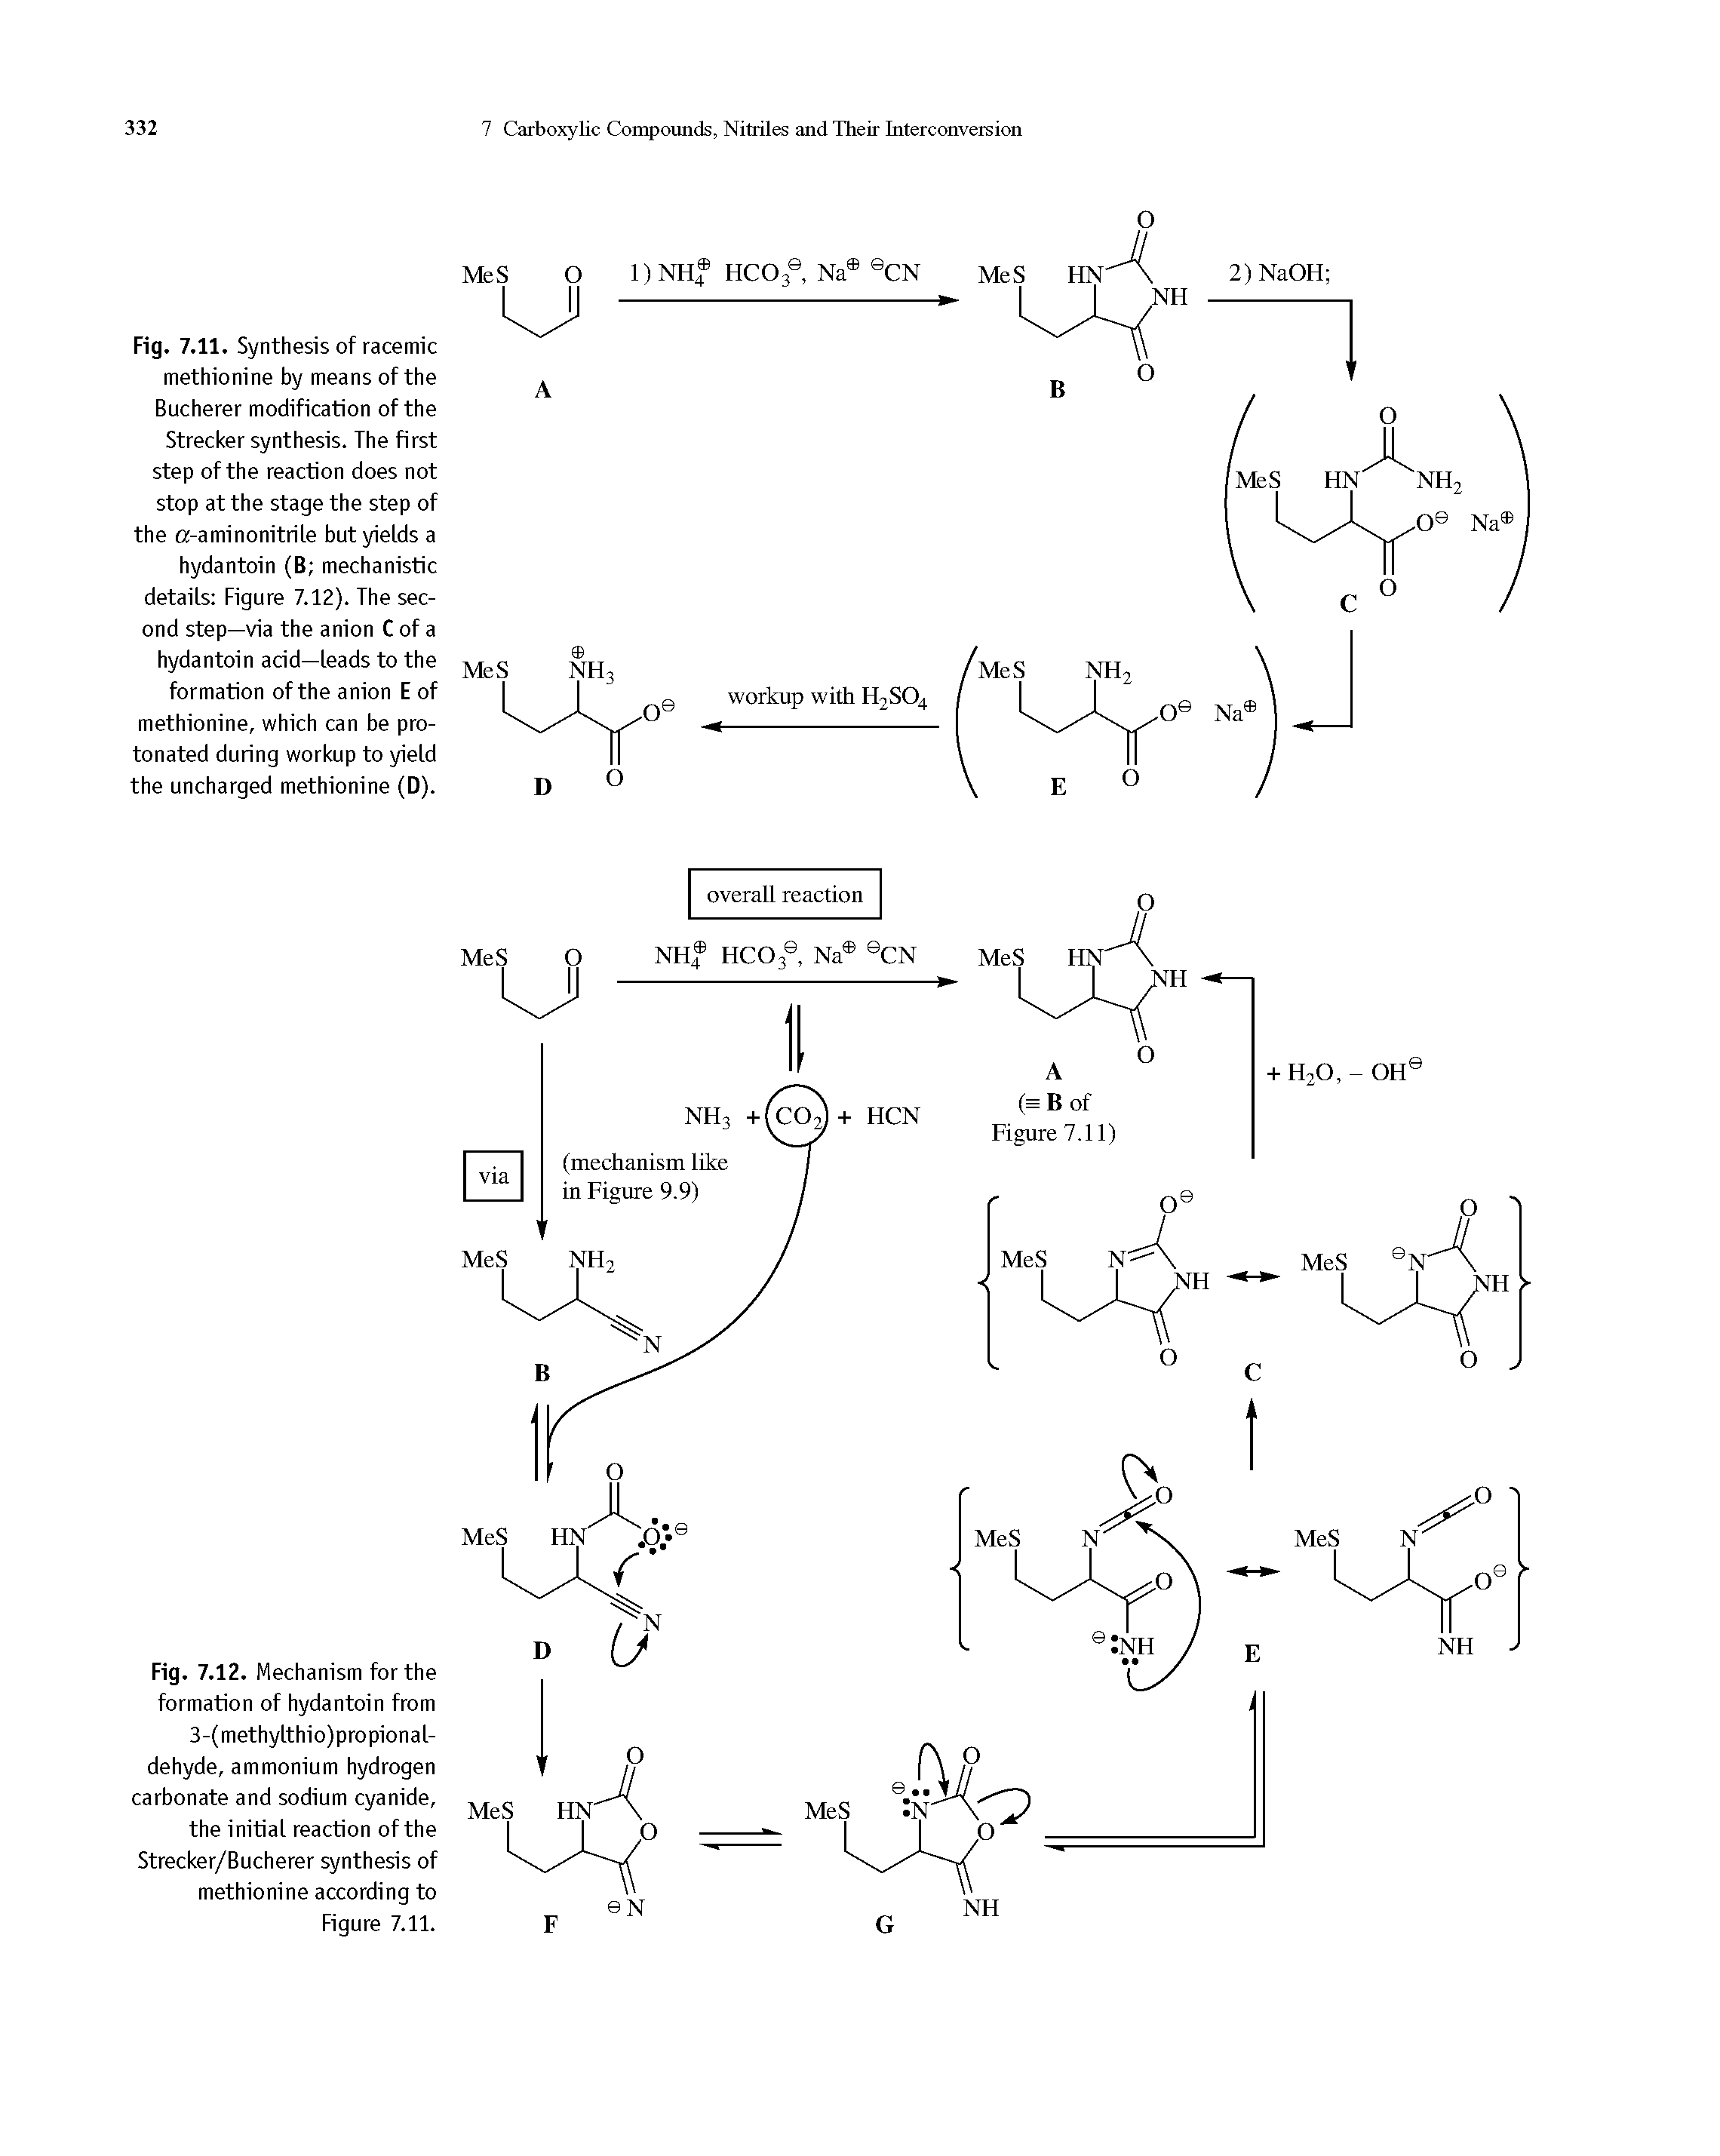 Fig. 7.11. Synthesis of racemic methionine by means of the Bucherer modification of the Strecker synthesis. The first step of the reaction does not stop at the stage the step of the a-aminonitrile but yields a hydantoin (B mechanistic details Figure 7.12). The second step—via the anion C of a hydantoin acid—leads to the formation of the anion E of methionine, which can be pro-tonated during workup to yield the uncharged methionine (D).